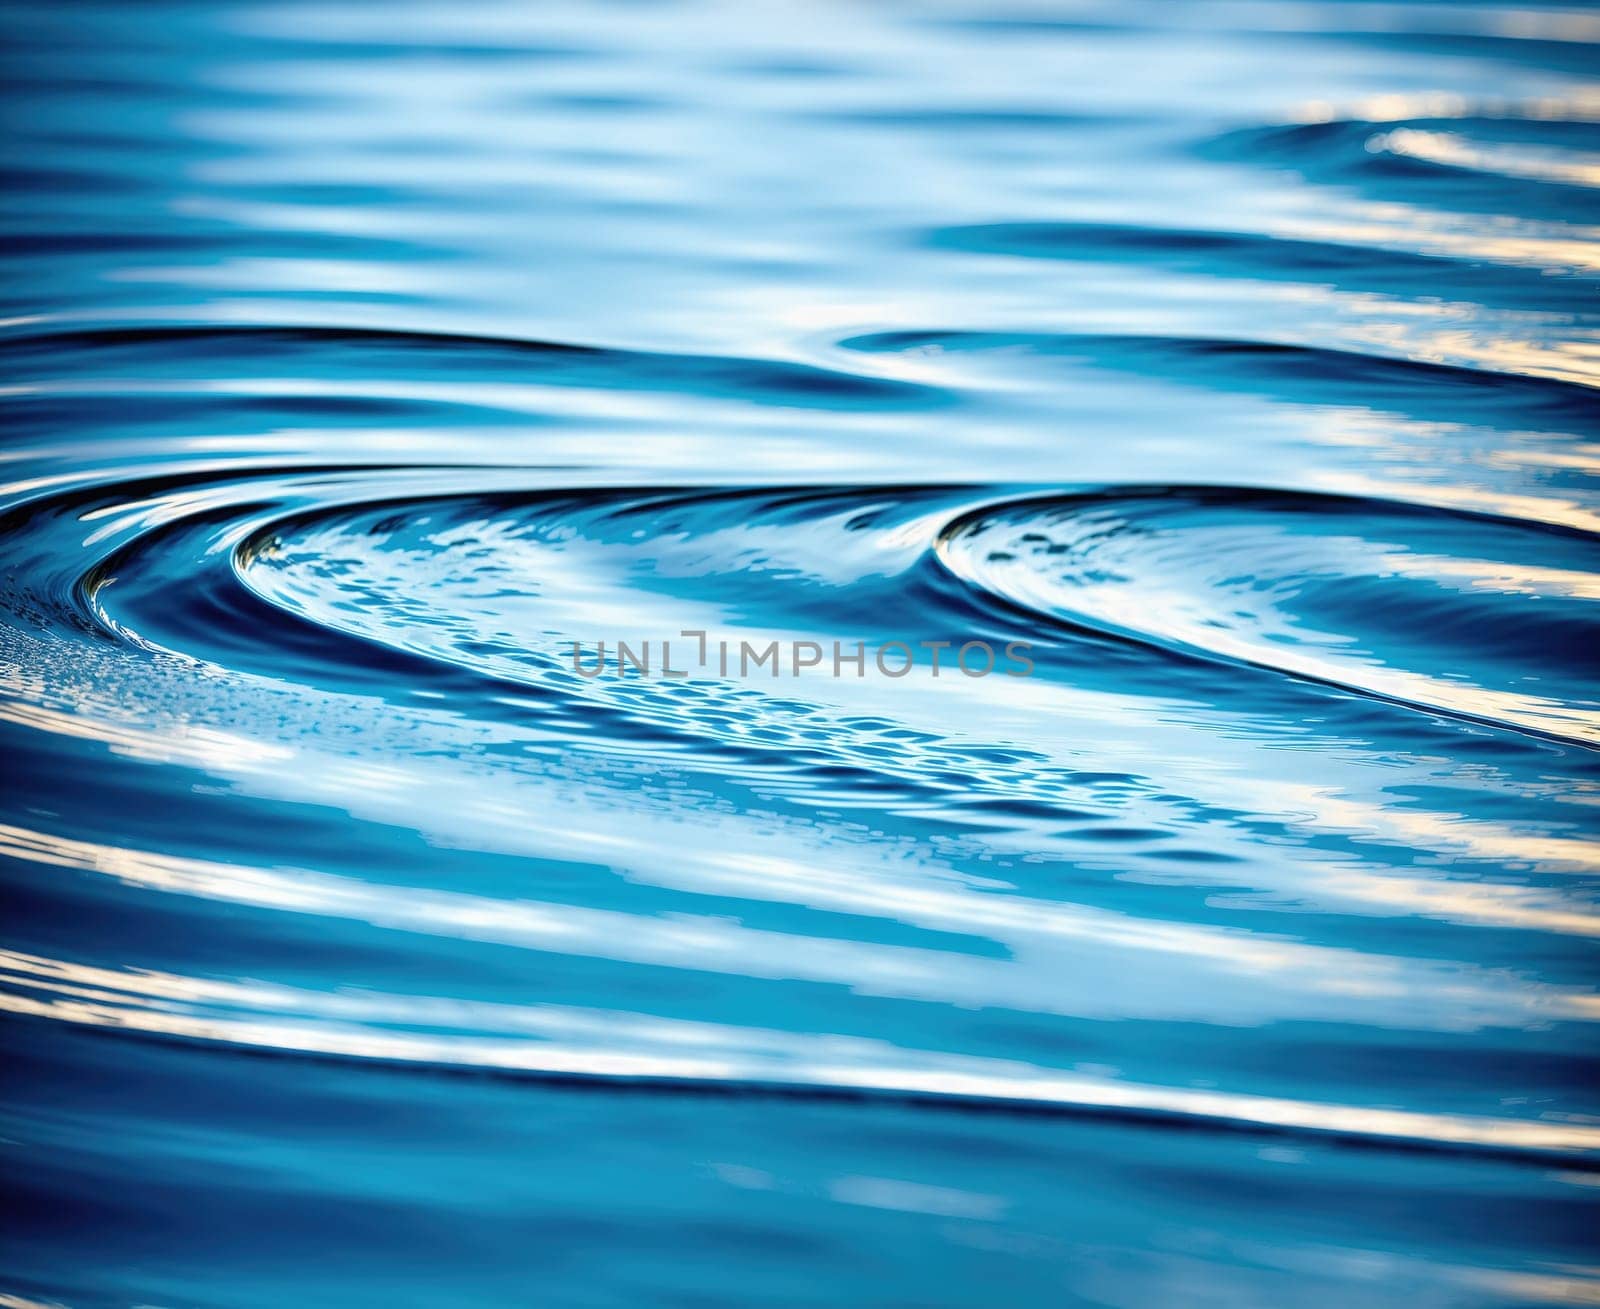 The image is a photograph of a body of water with ripples in the surface.